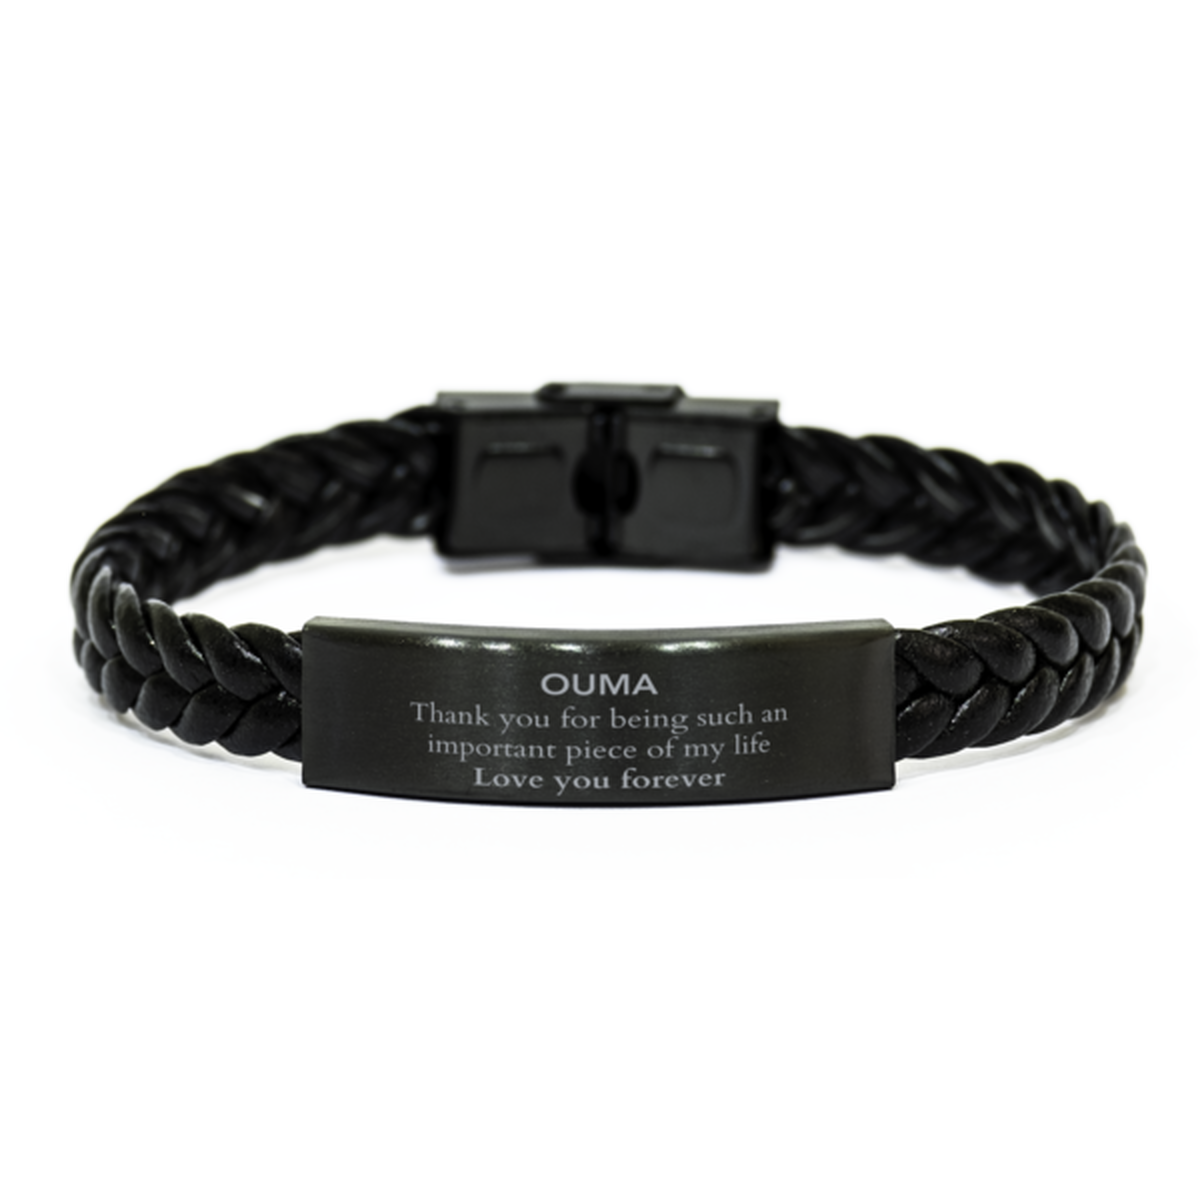 Appropriate Ouma Braided Leather Bracelet Epic Birthday Gifts for Ouma Thank you for being such an important piece of my life Ouma Christmas Mothers Fathers Day